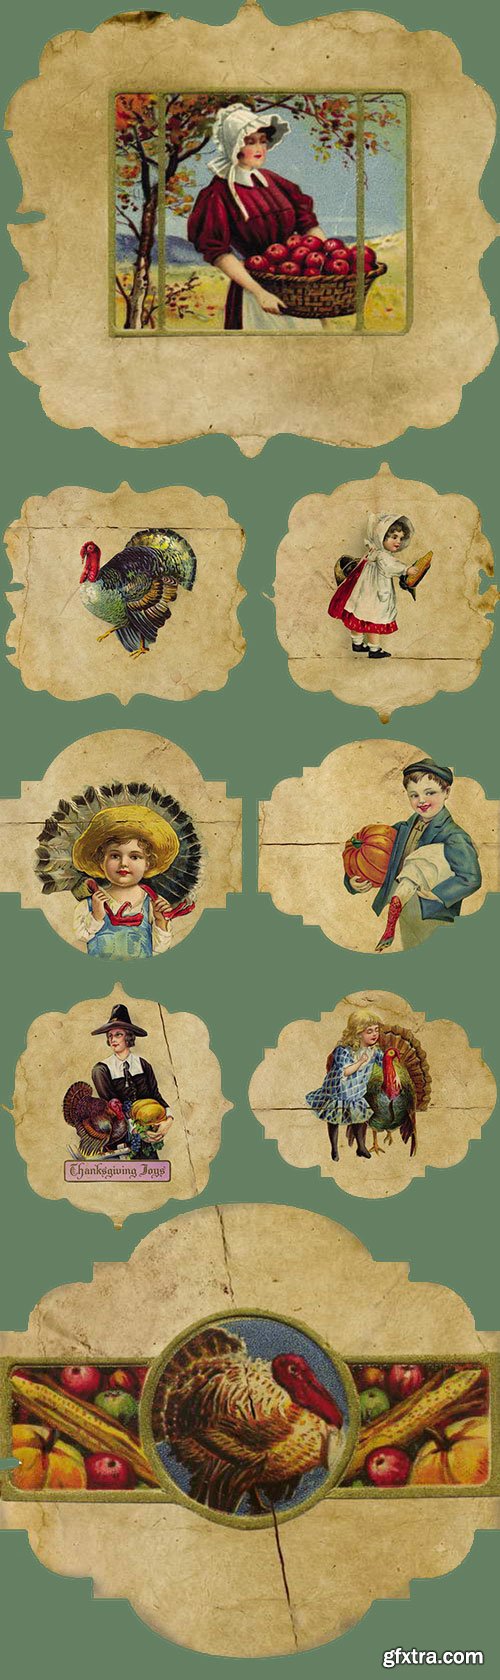 Vintage Labels for Thanksgiving Day